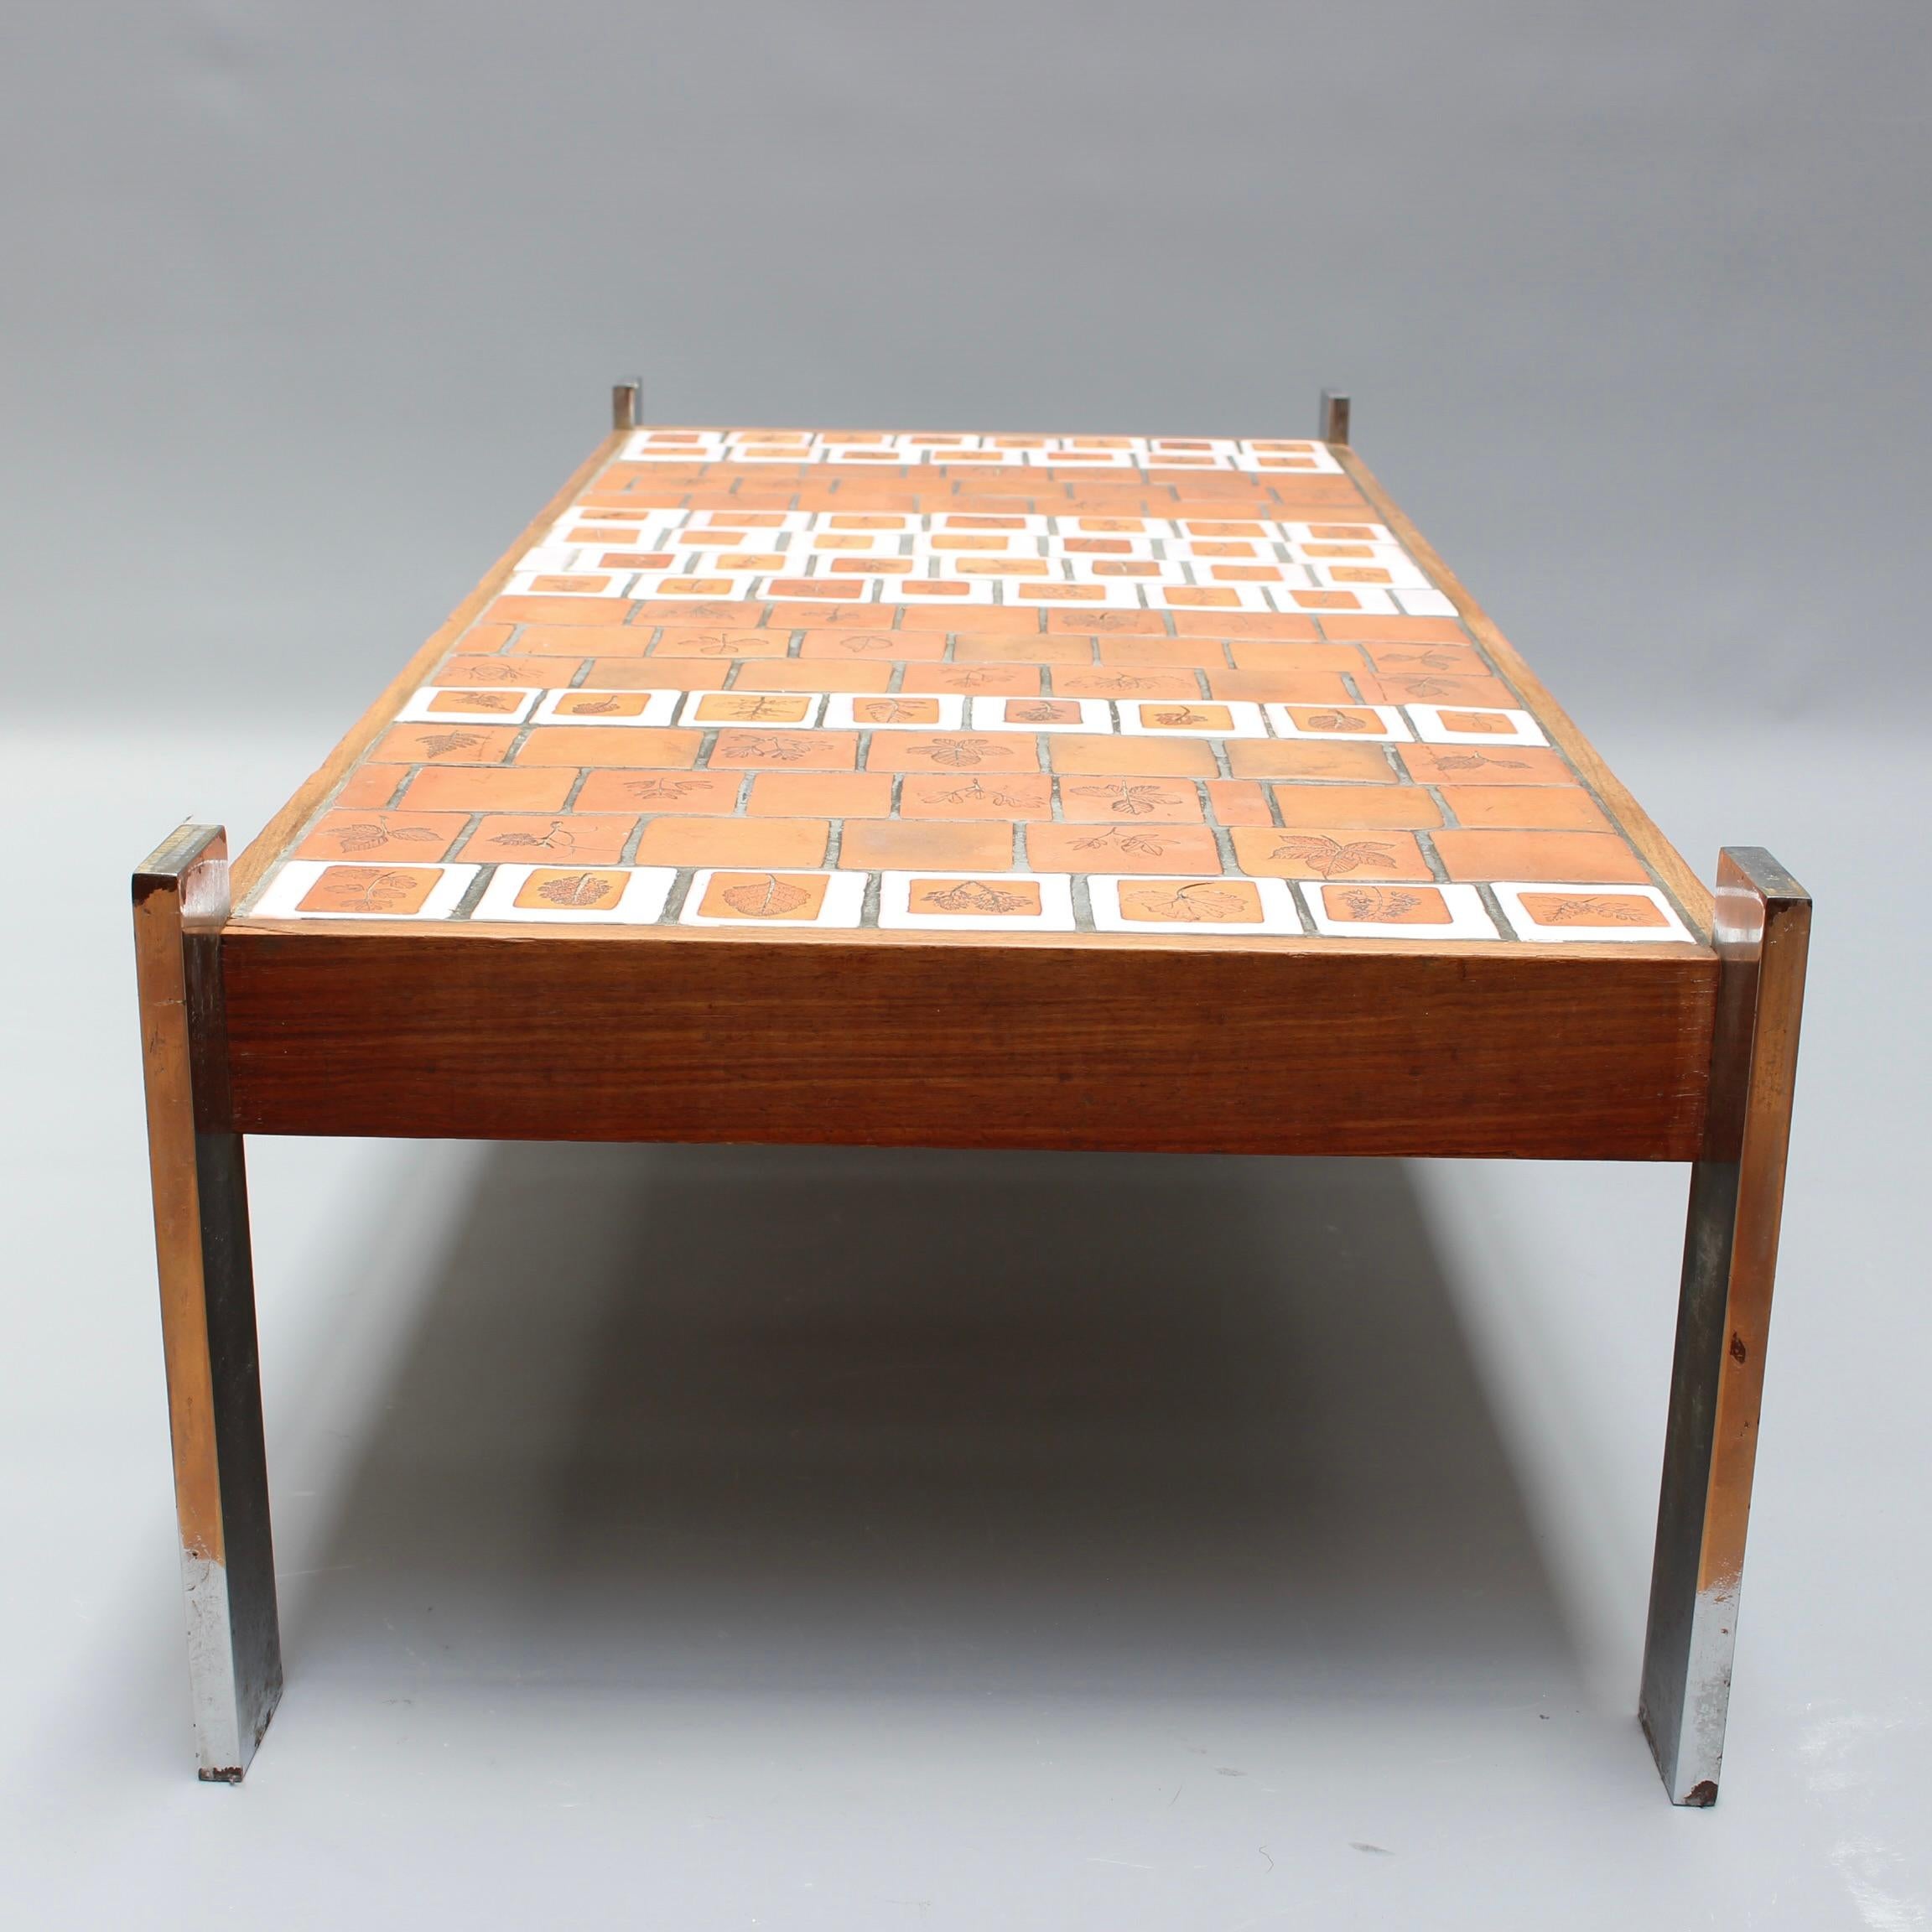 Vintage French Coffee Table with Leaf Motif Tiles by Roger Capron (circa 1970s) For Sale 7